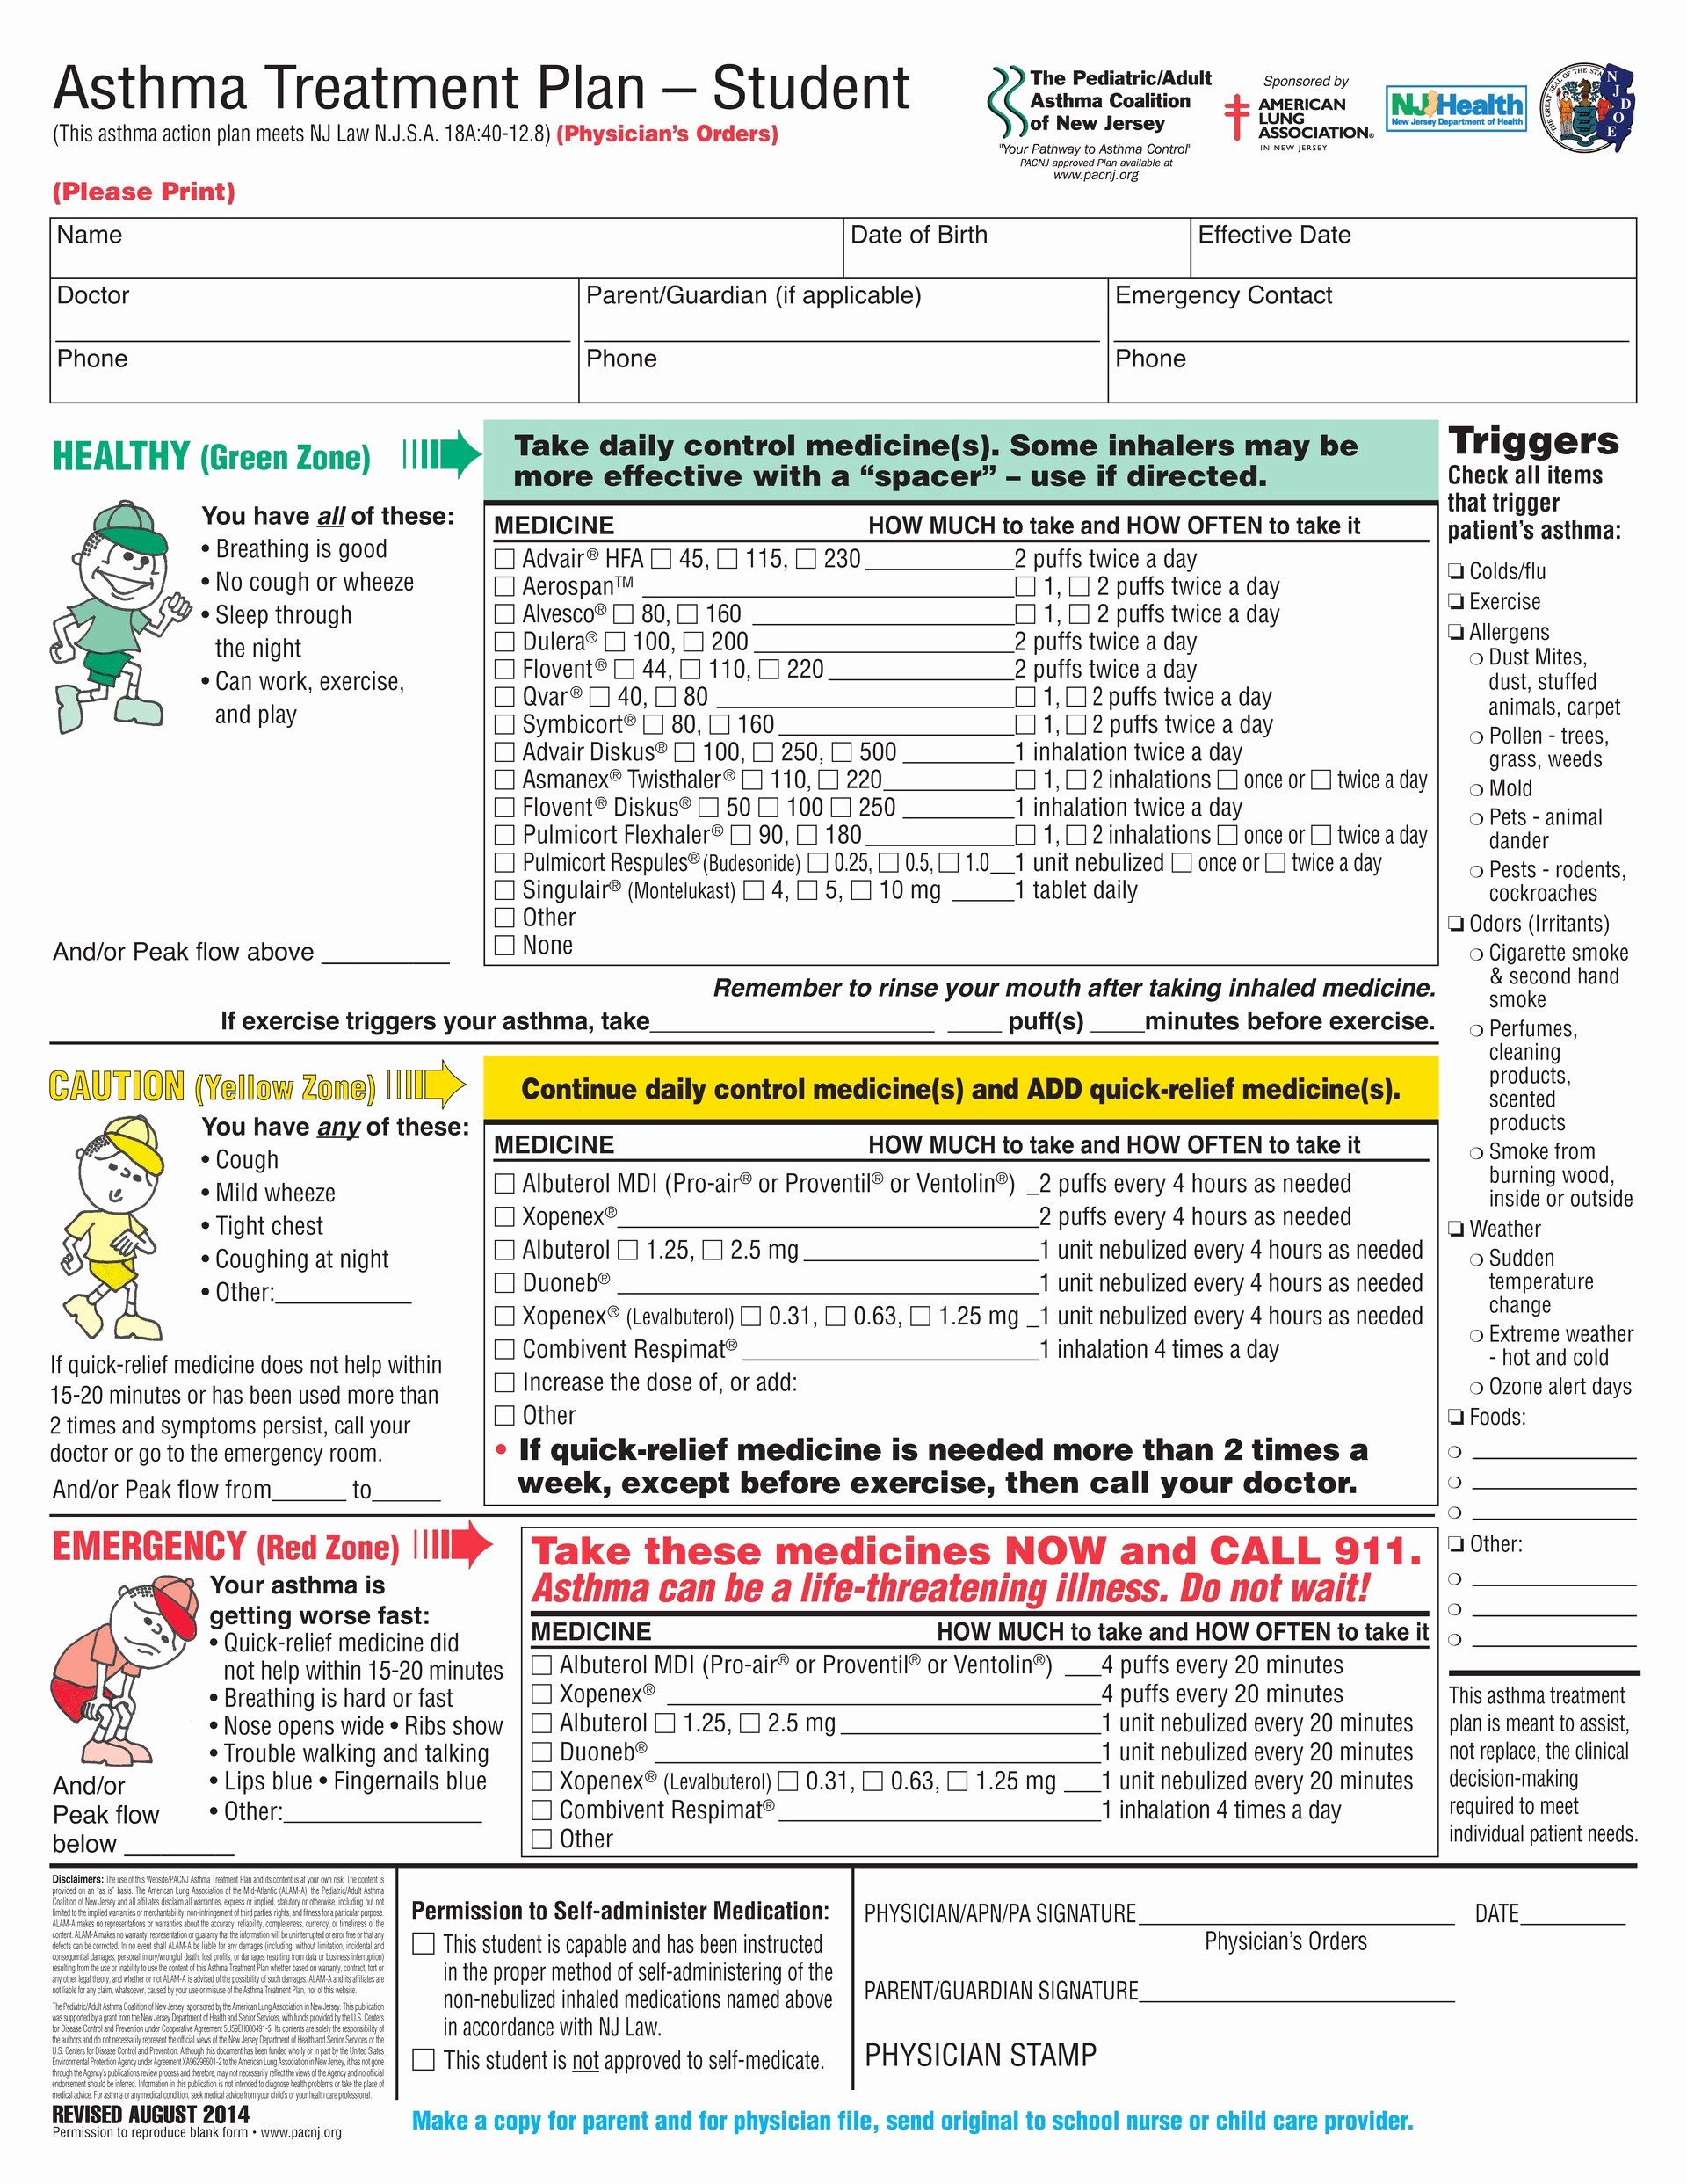 Asthma Action Plan form Fresh asthma Action Plan form – Nurse forms – Paterson Charter